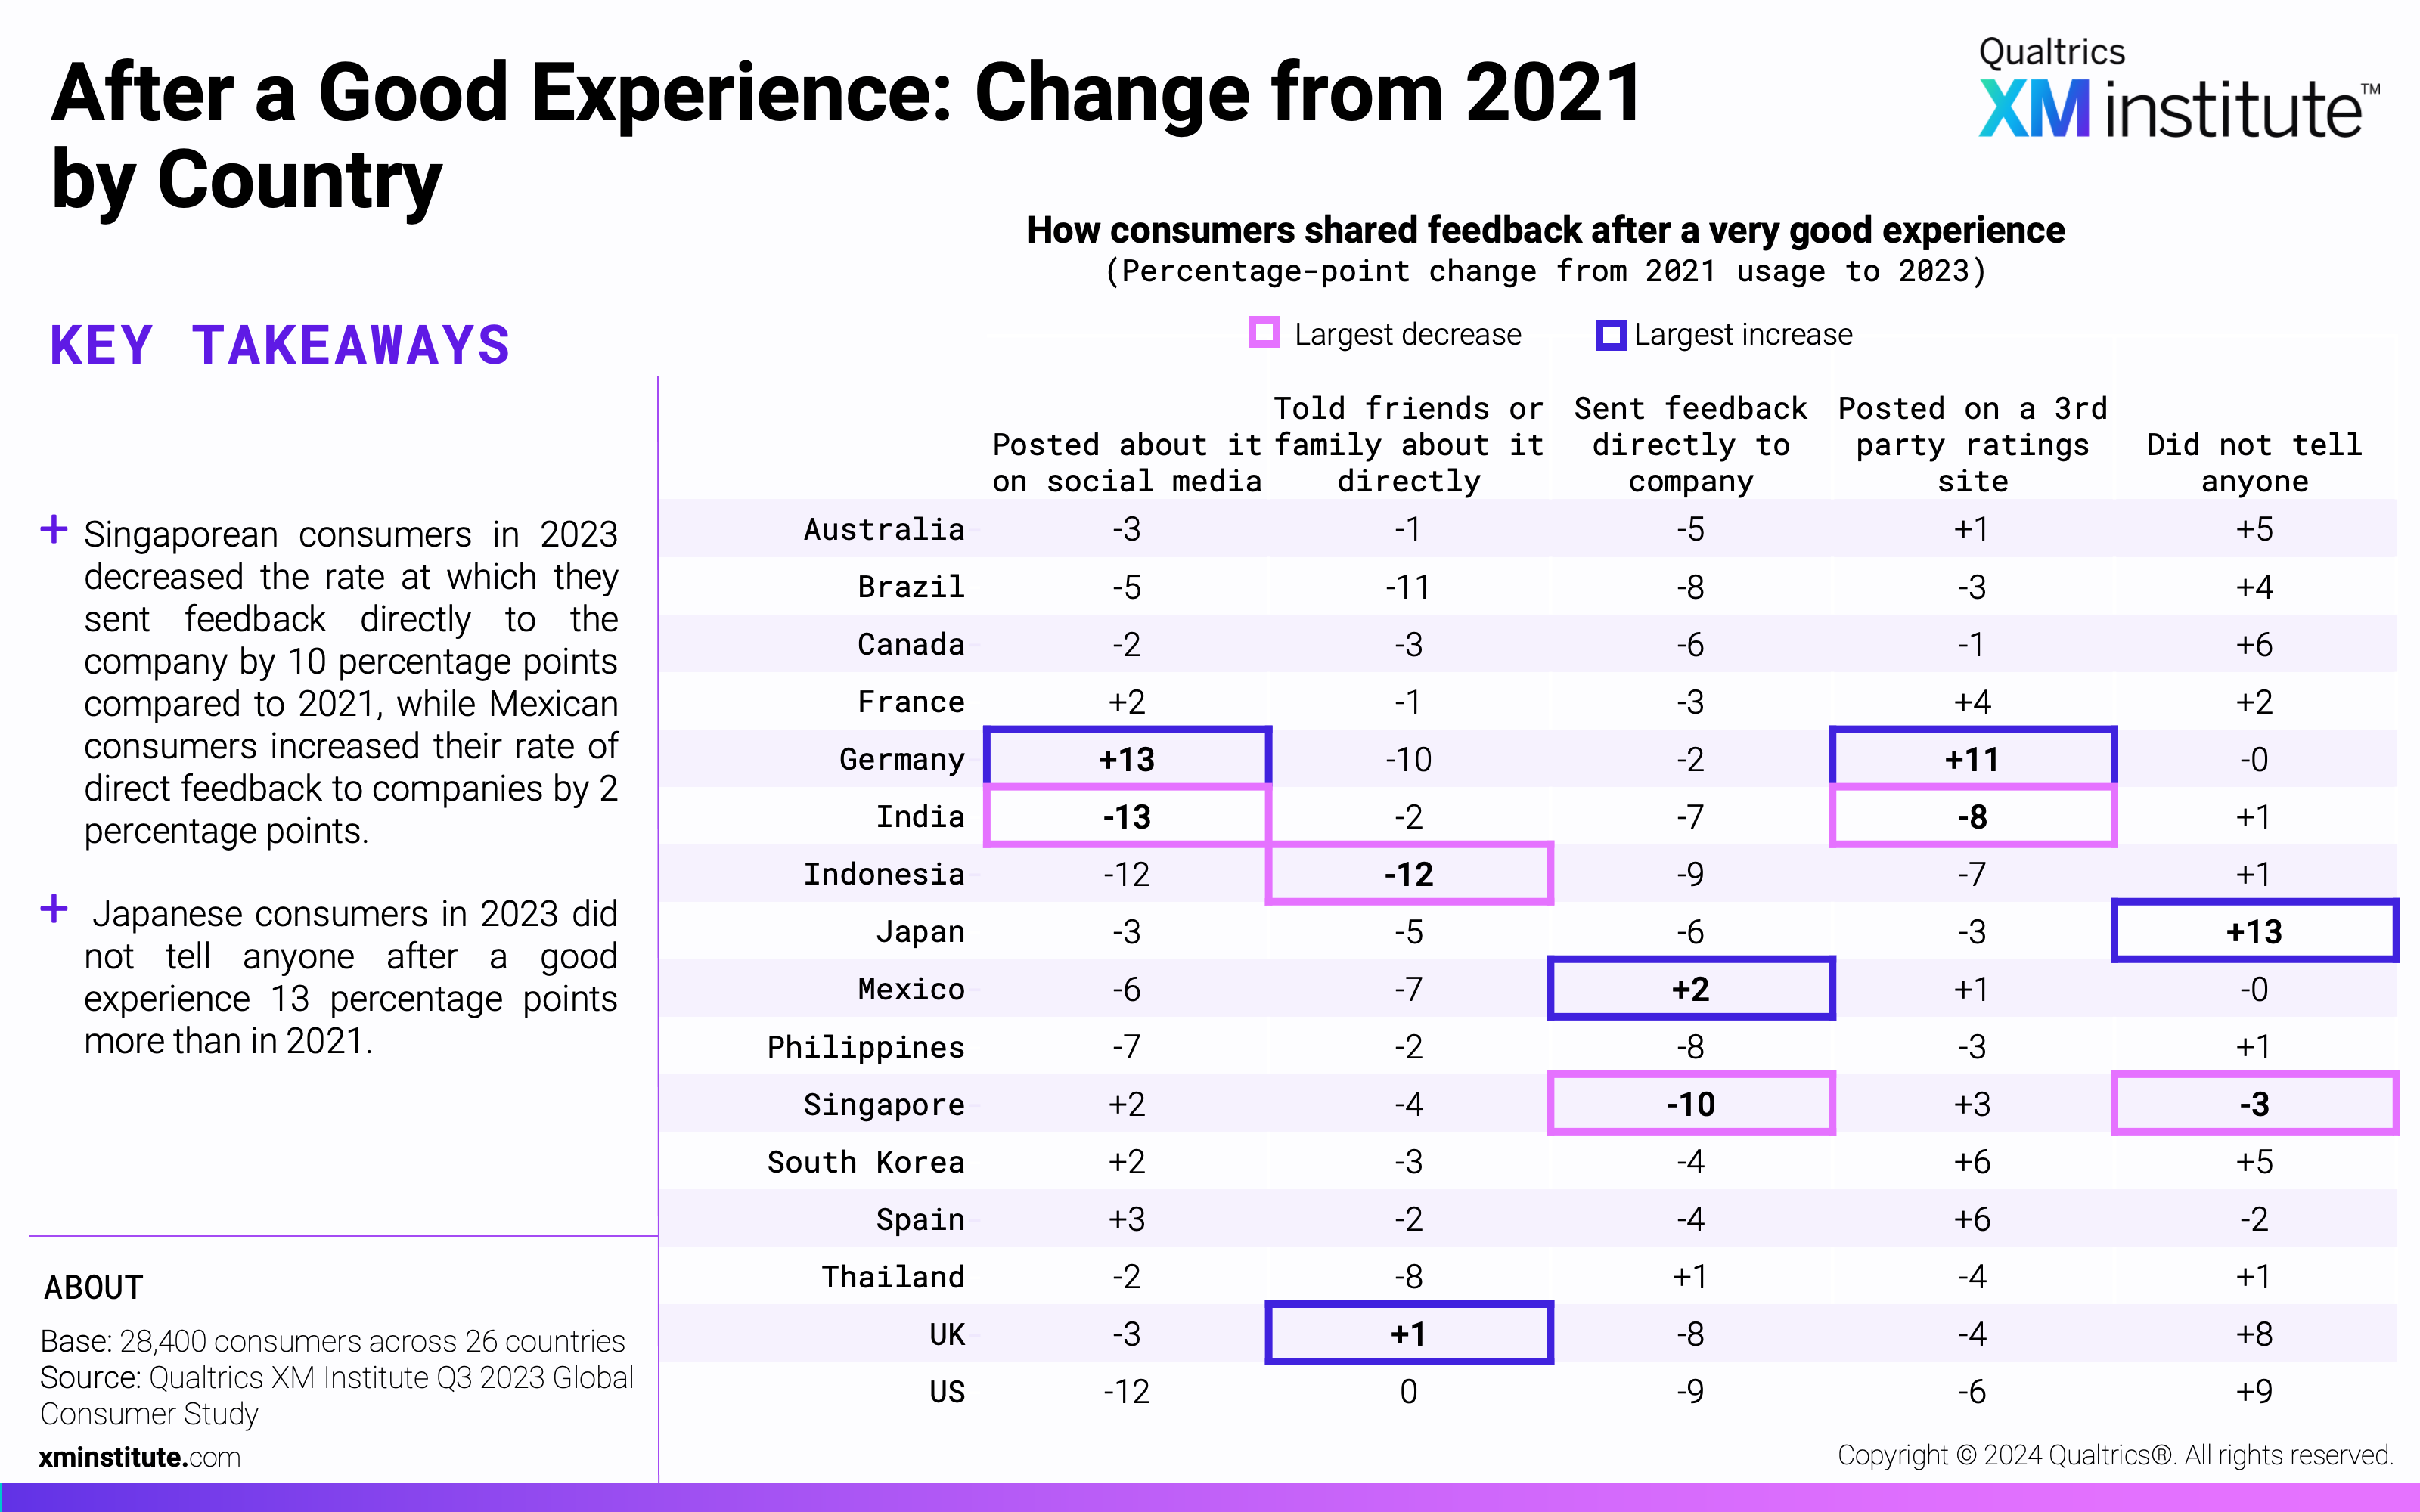 This table shows the percentage-point change in how consumers shared feedback after a very good experience in 2024 compare to 2021. 